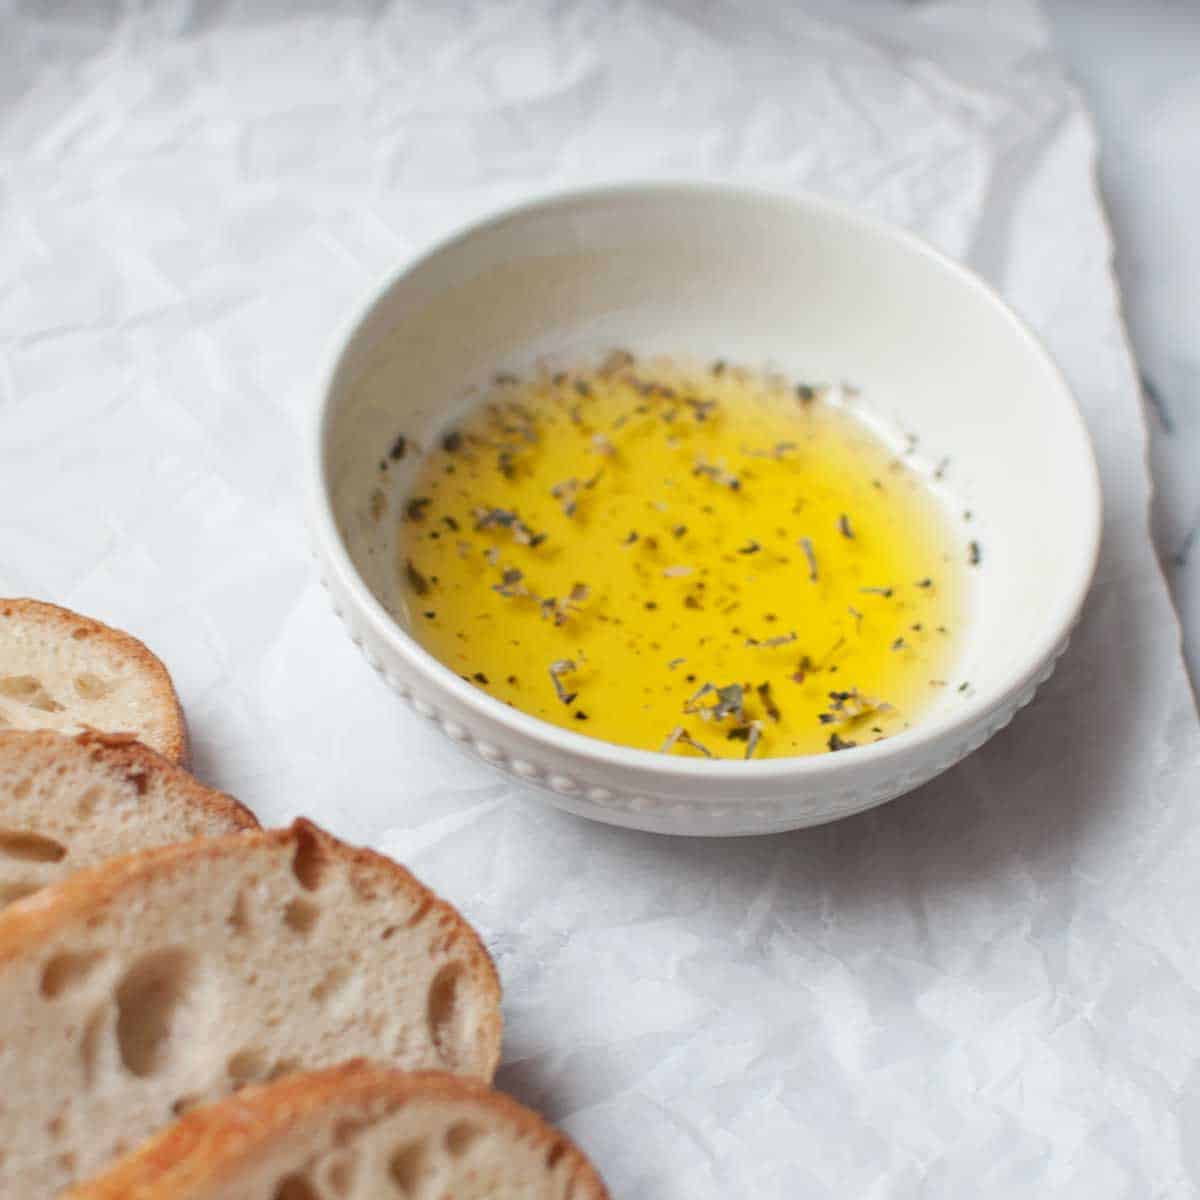 olive oil dip (olive oil and spices) in a small white bowl